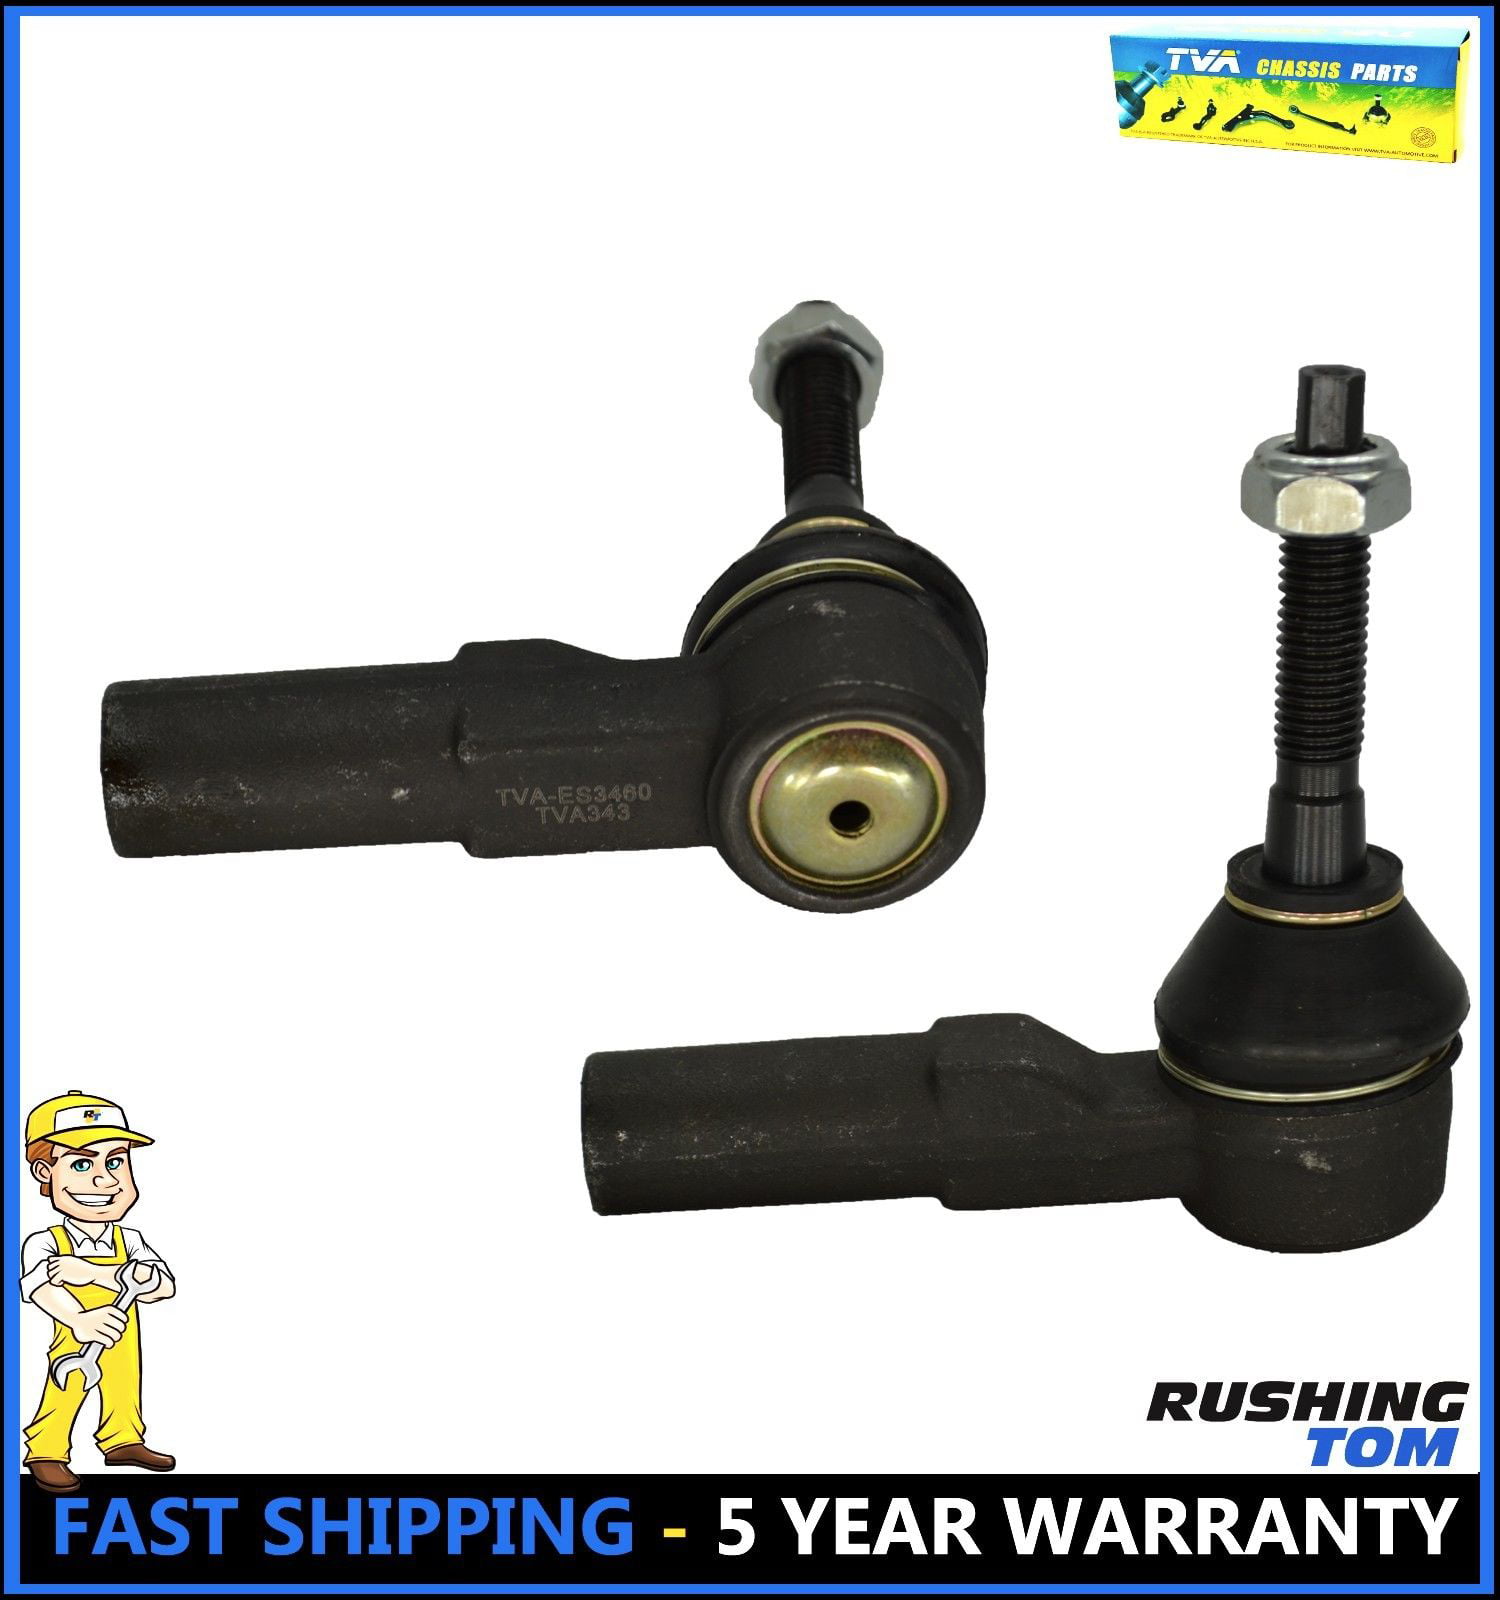 2 Outer Tie Rod Ends Left & Right Set For Chevrolet Lumina Monte Carlo 1998-2001